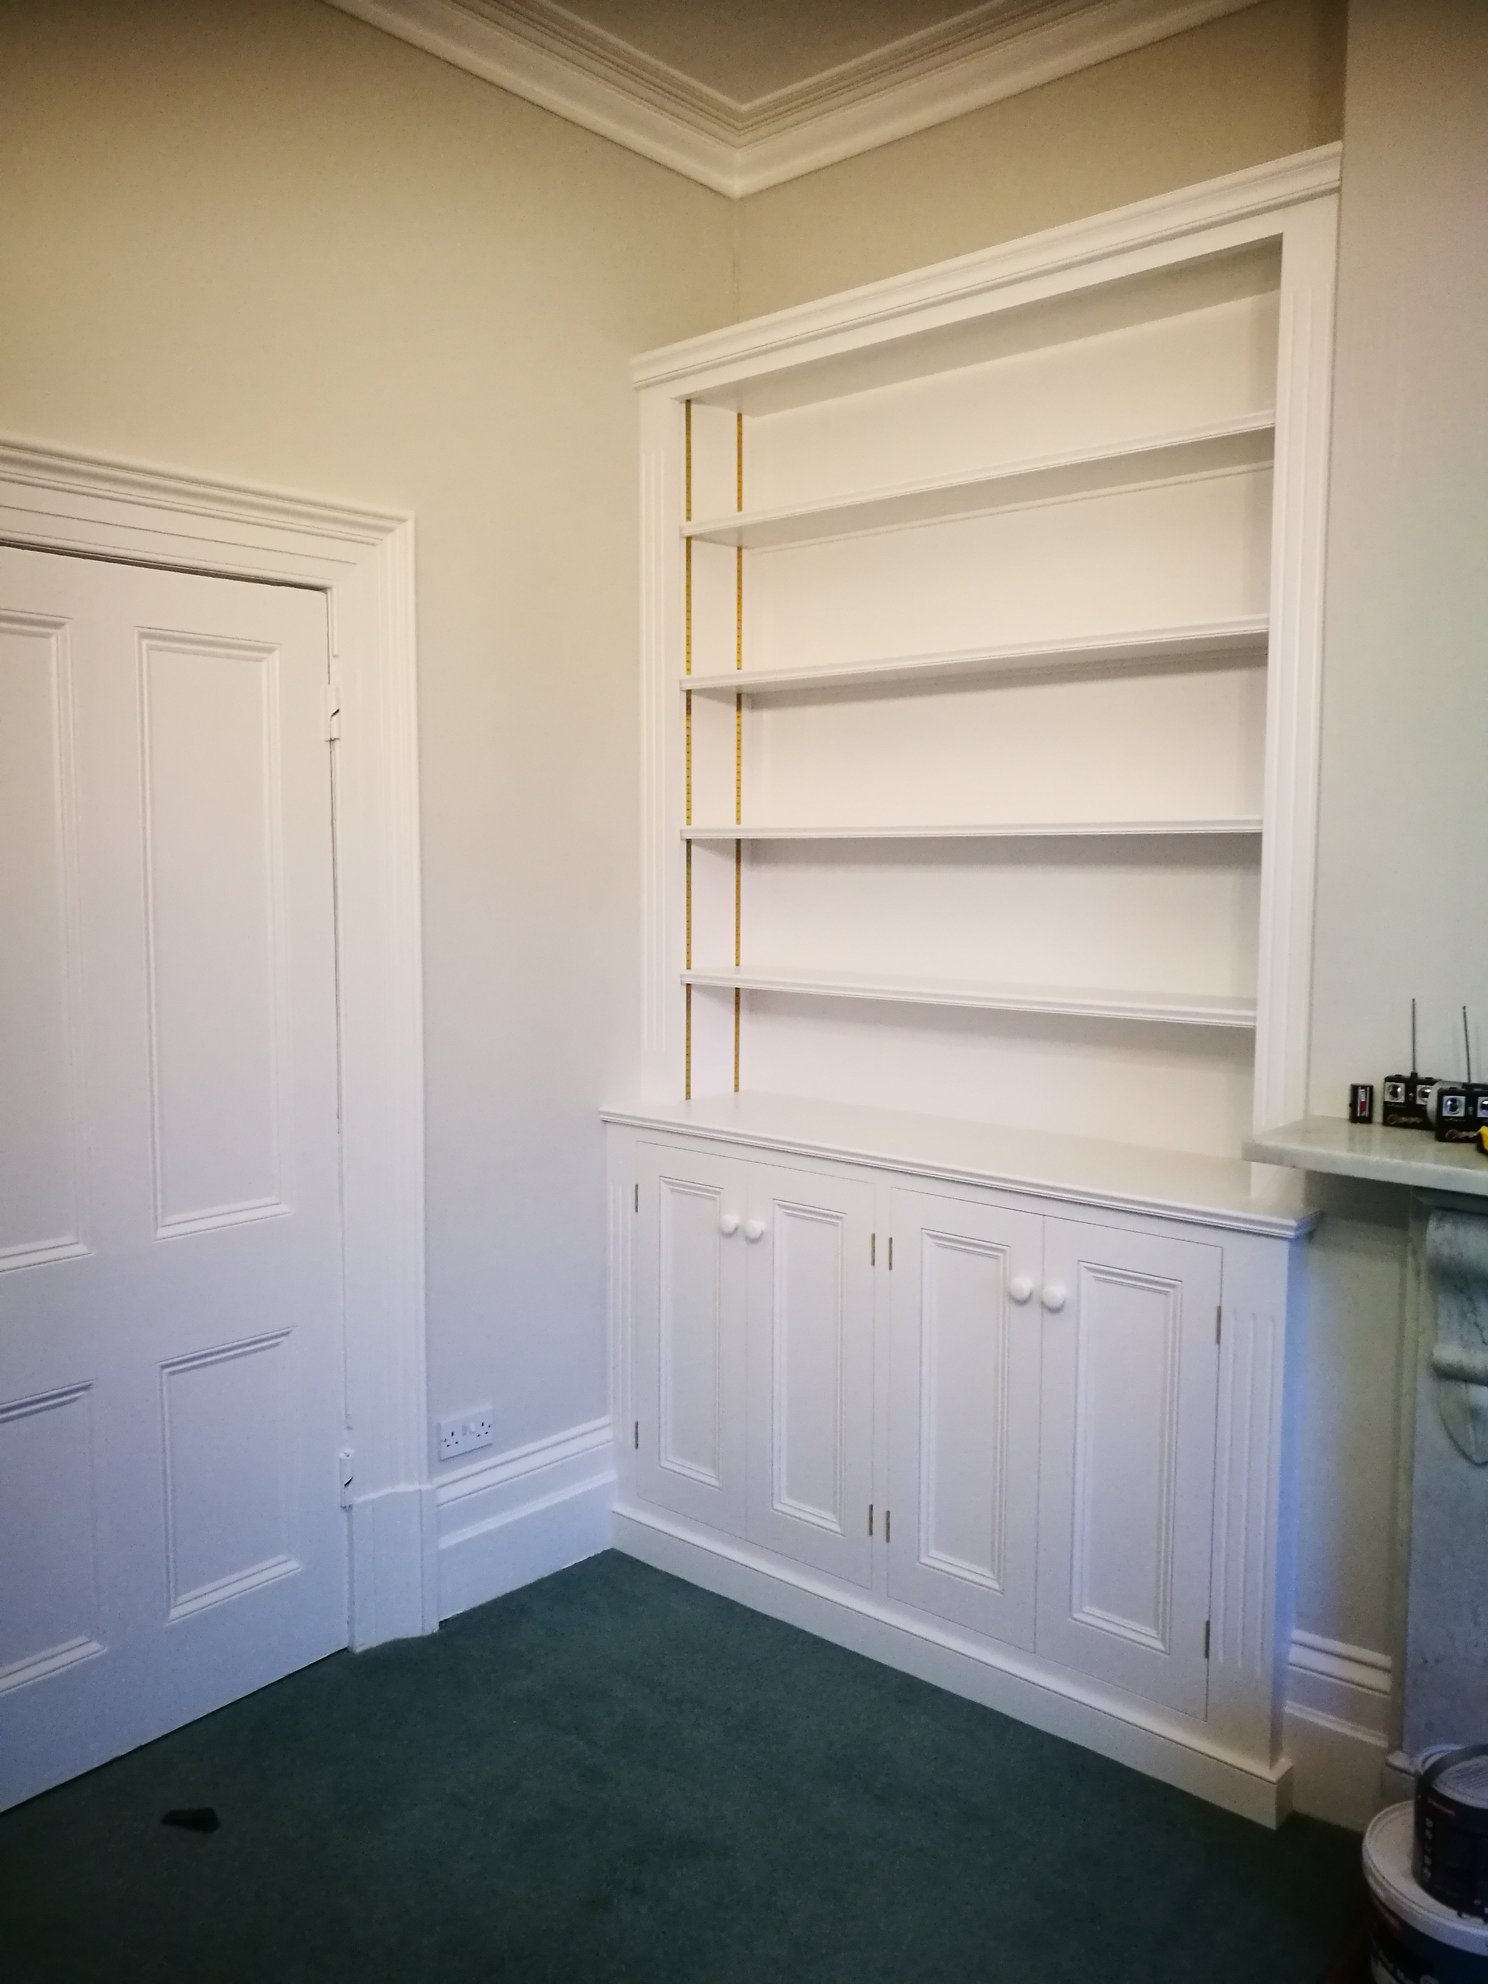 Bespoke timber bookcase storage by Kings Stag Joinery